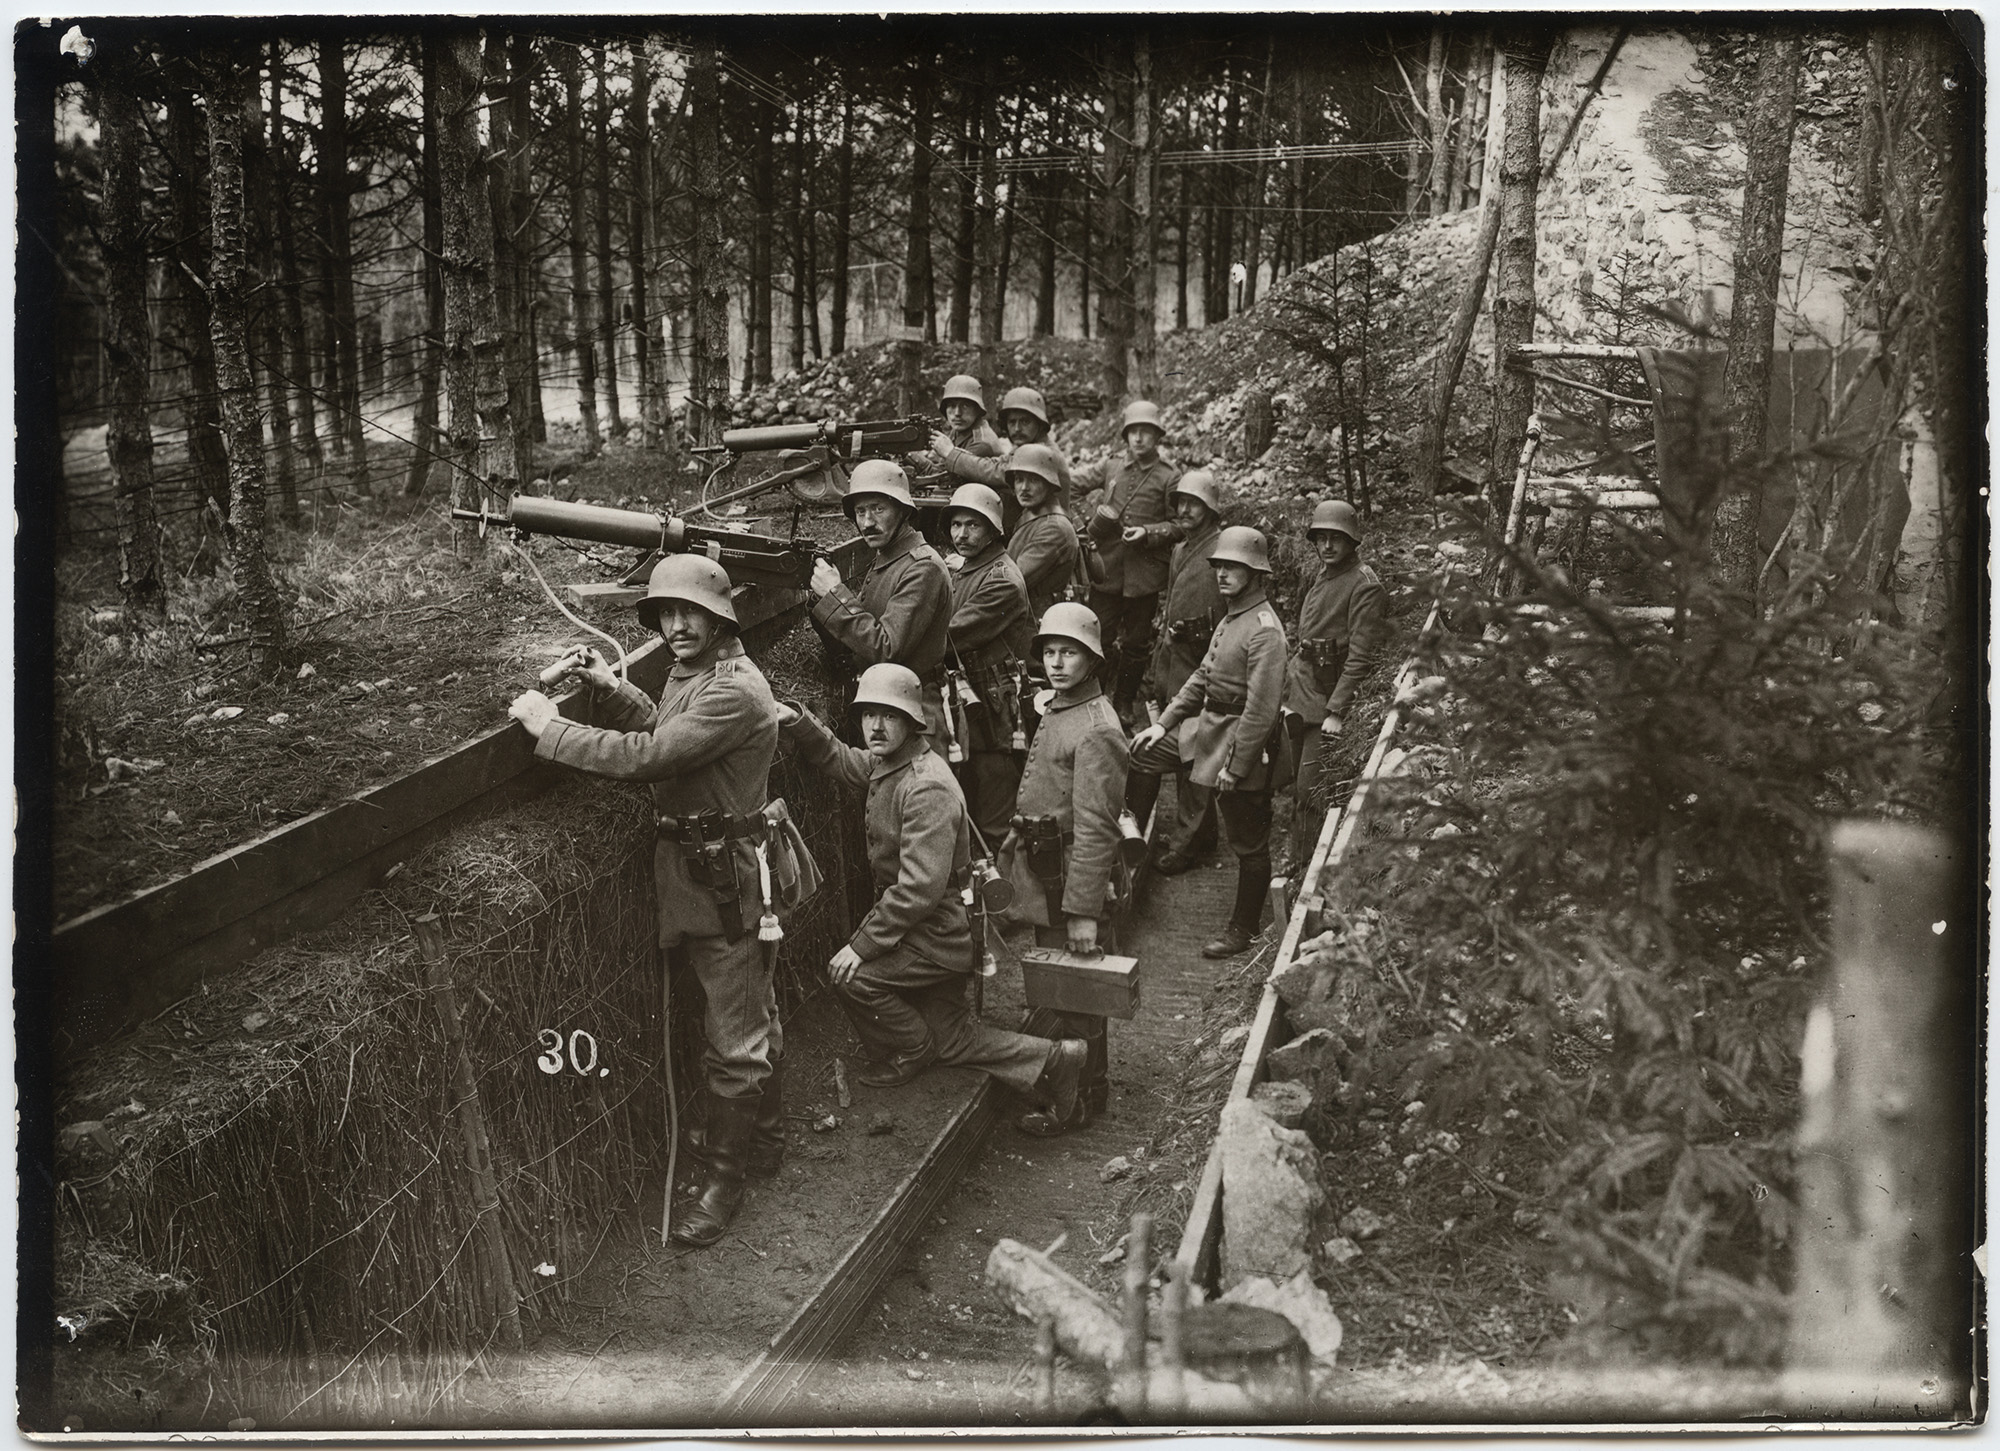 Black and white photograph of a group of men in WWI uniform standing and sitting in a trench looking up at the viewer